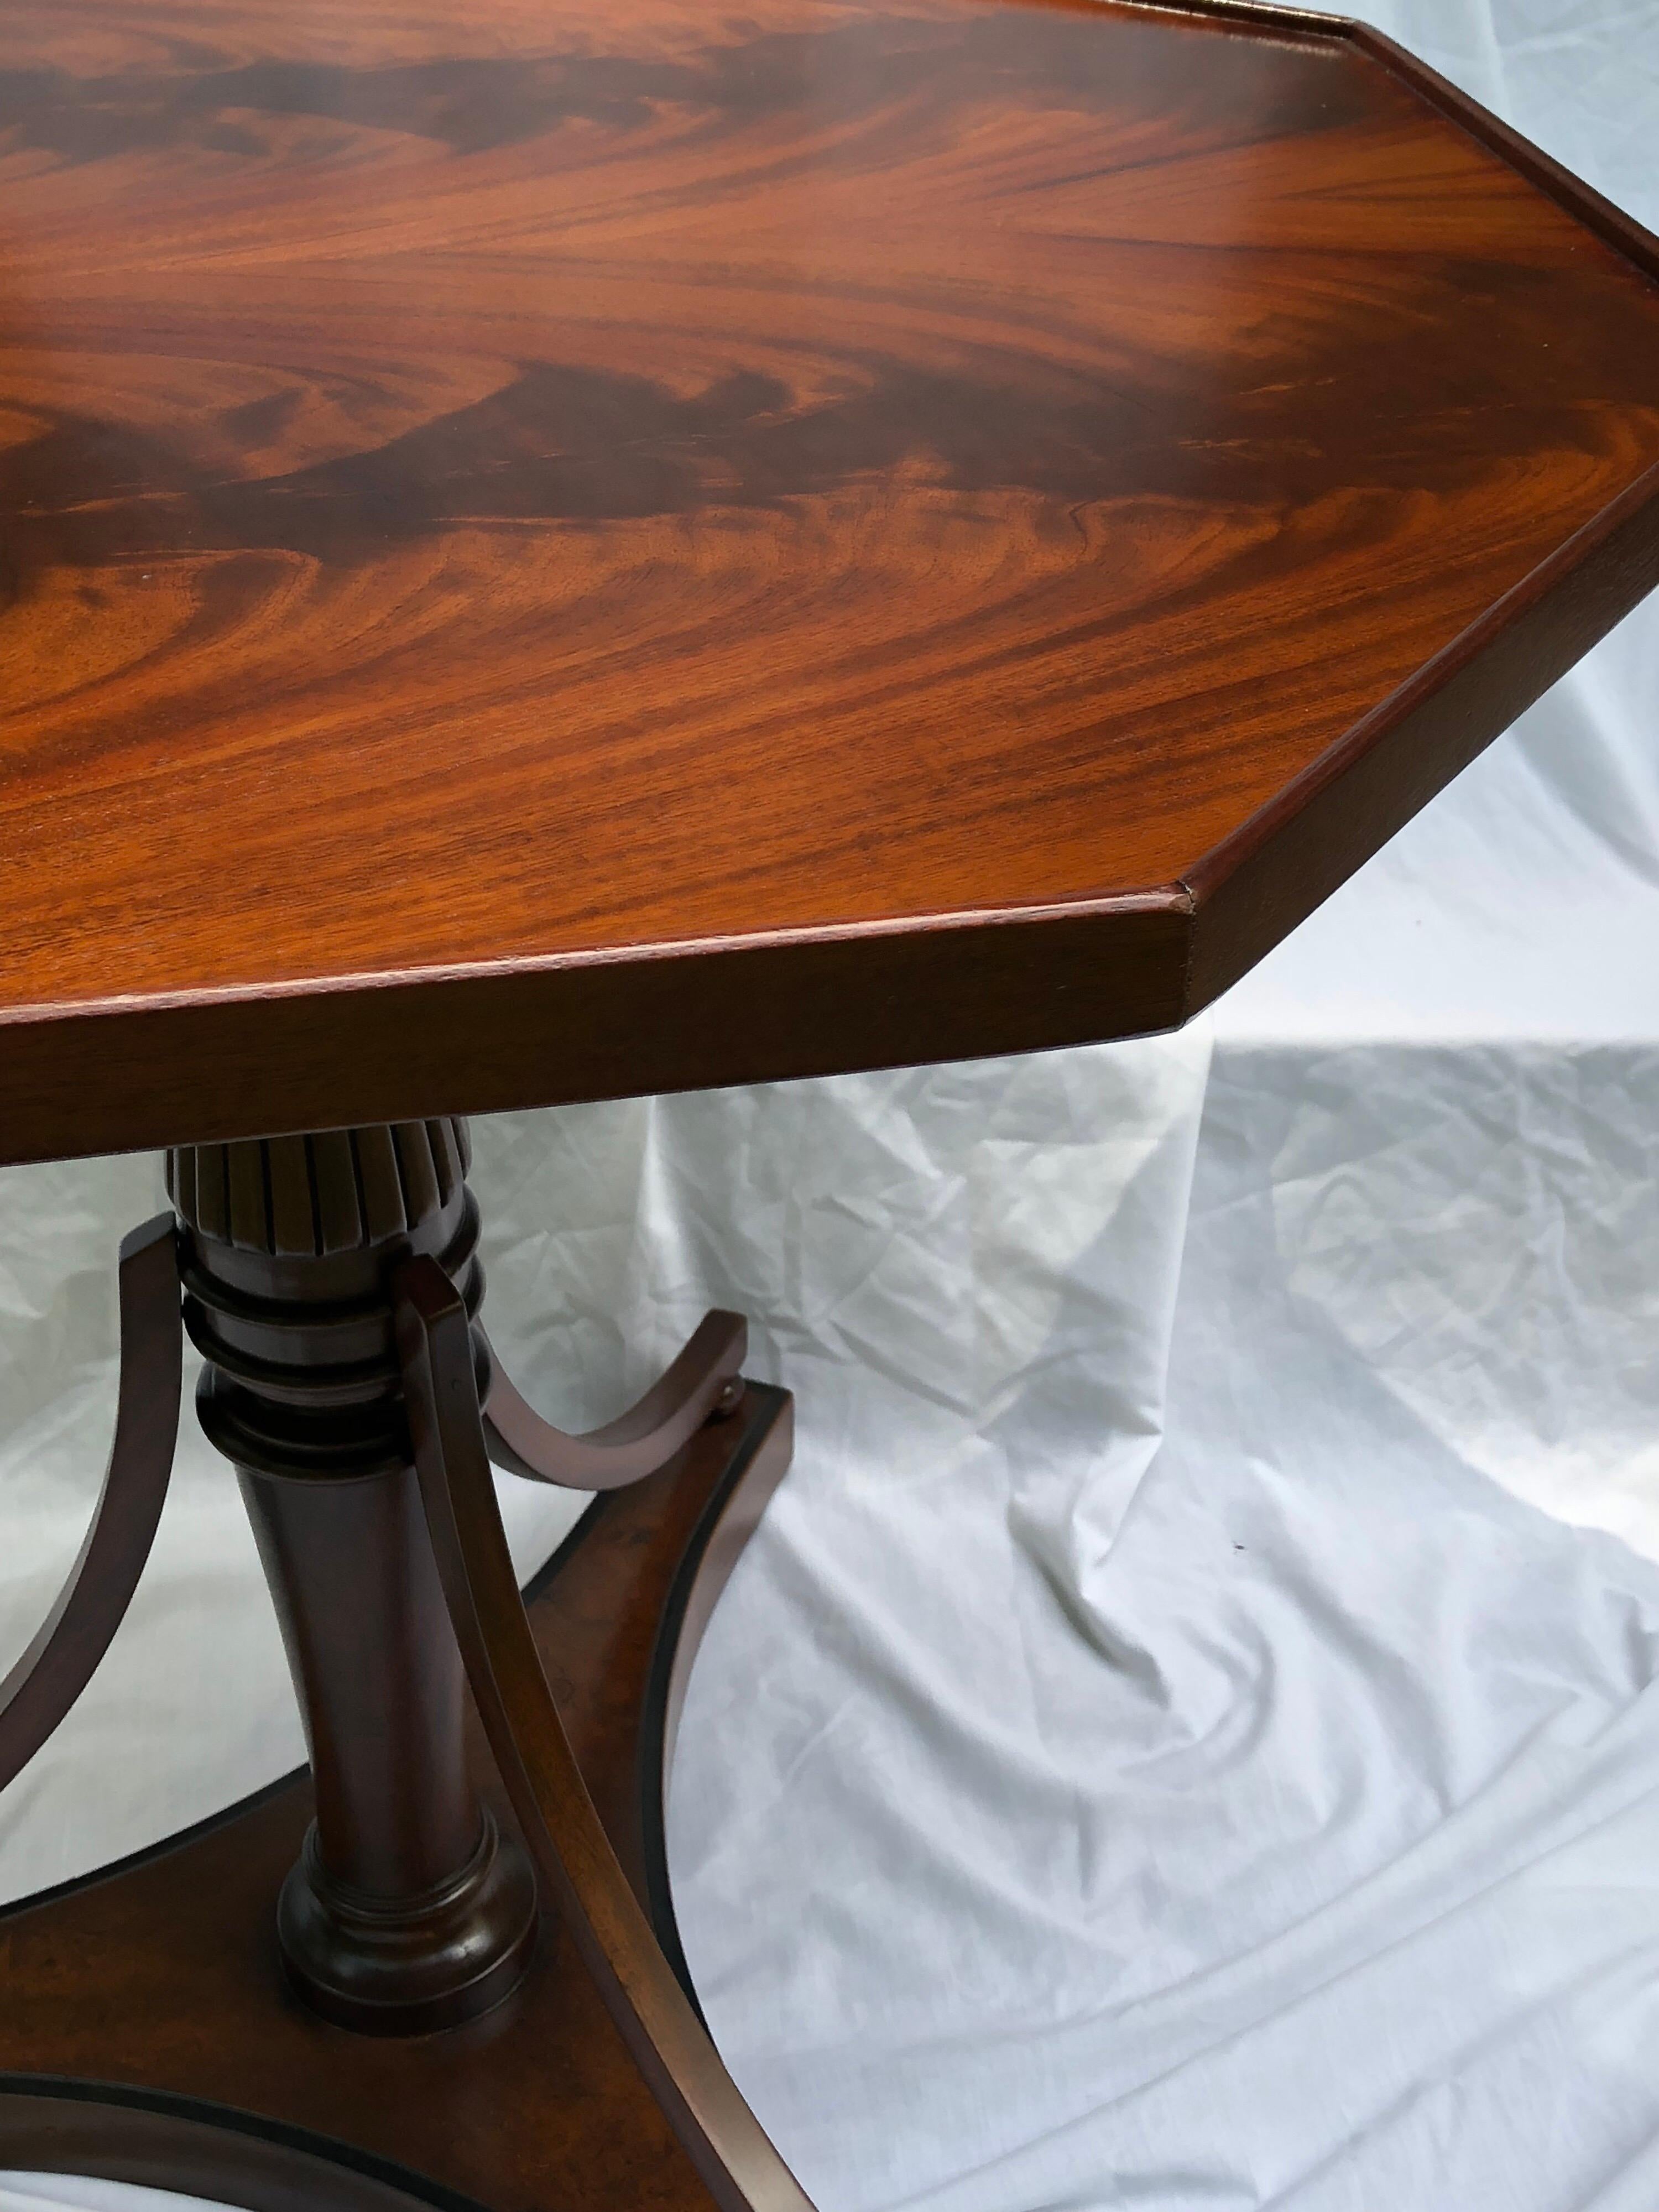 Octagonal Crotch Mahogany Sheraton-Style Table In Good Condition For Sale In Hudson, NY